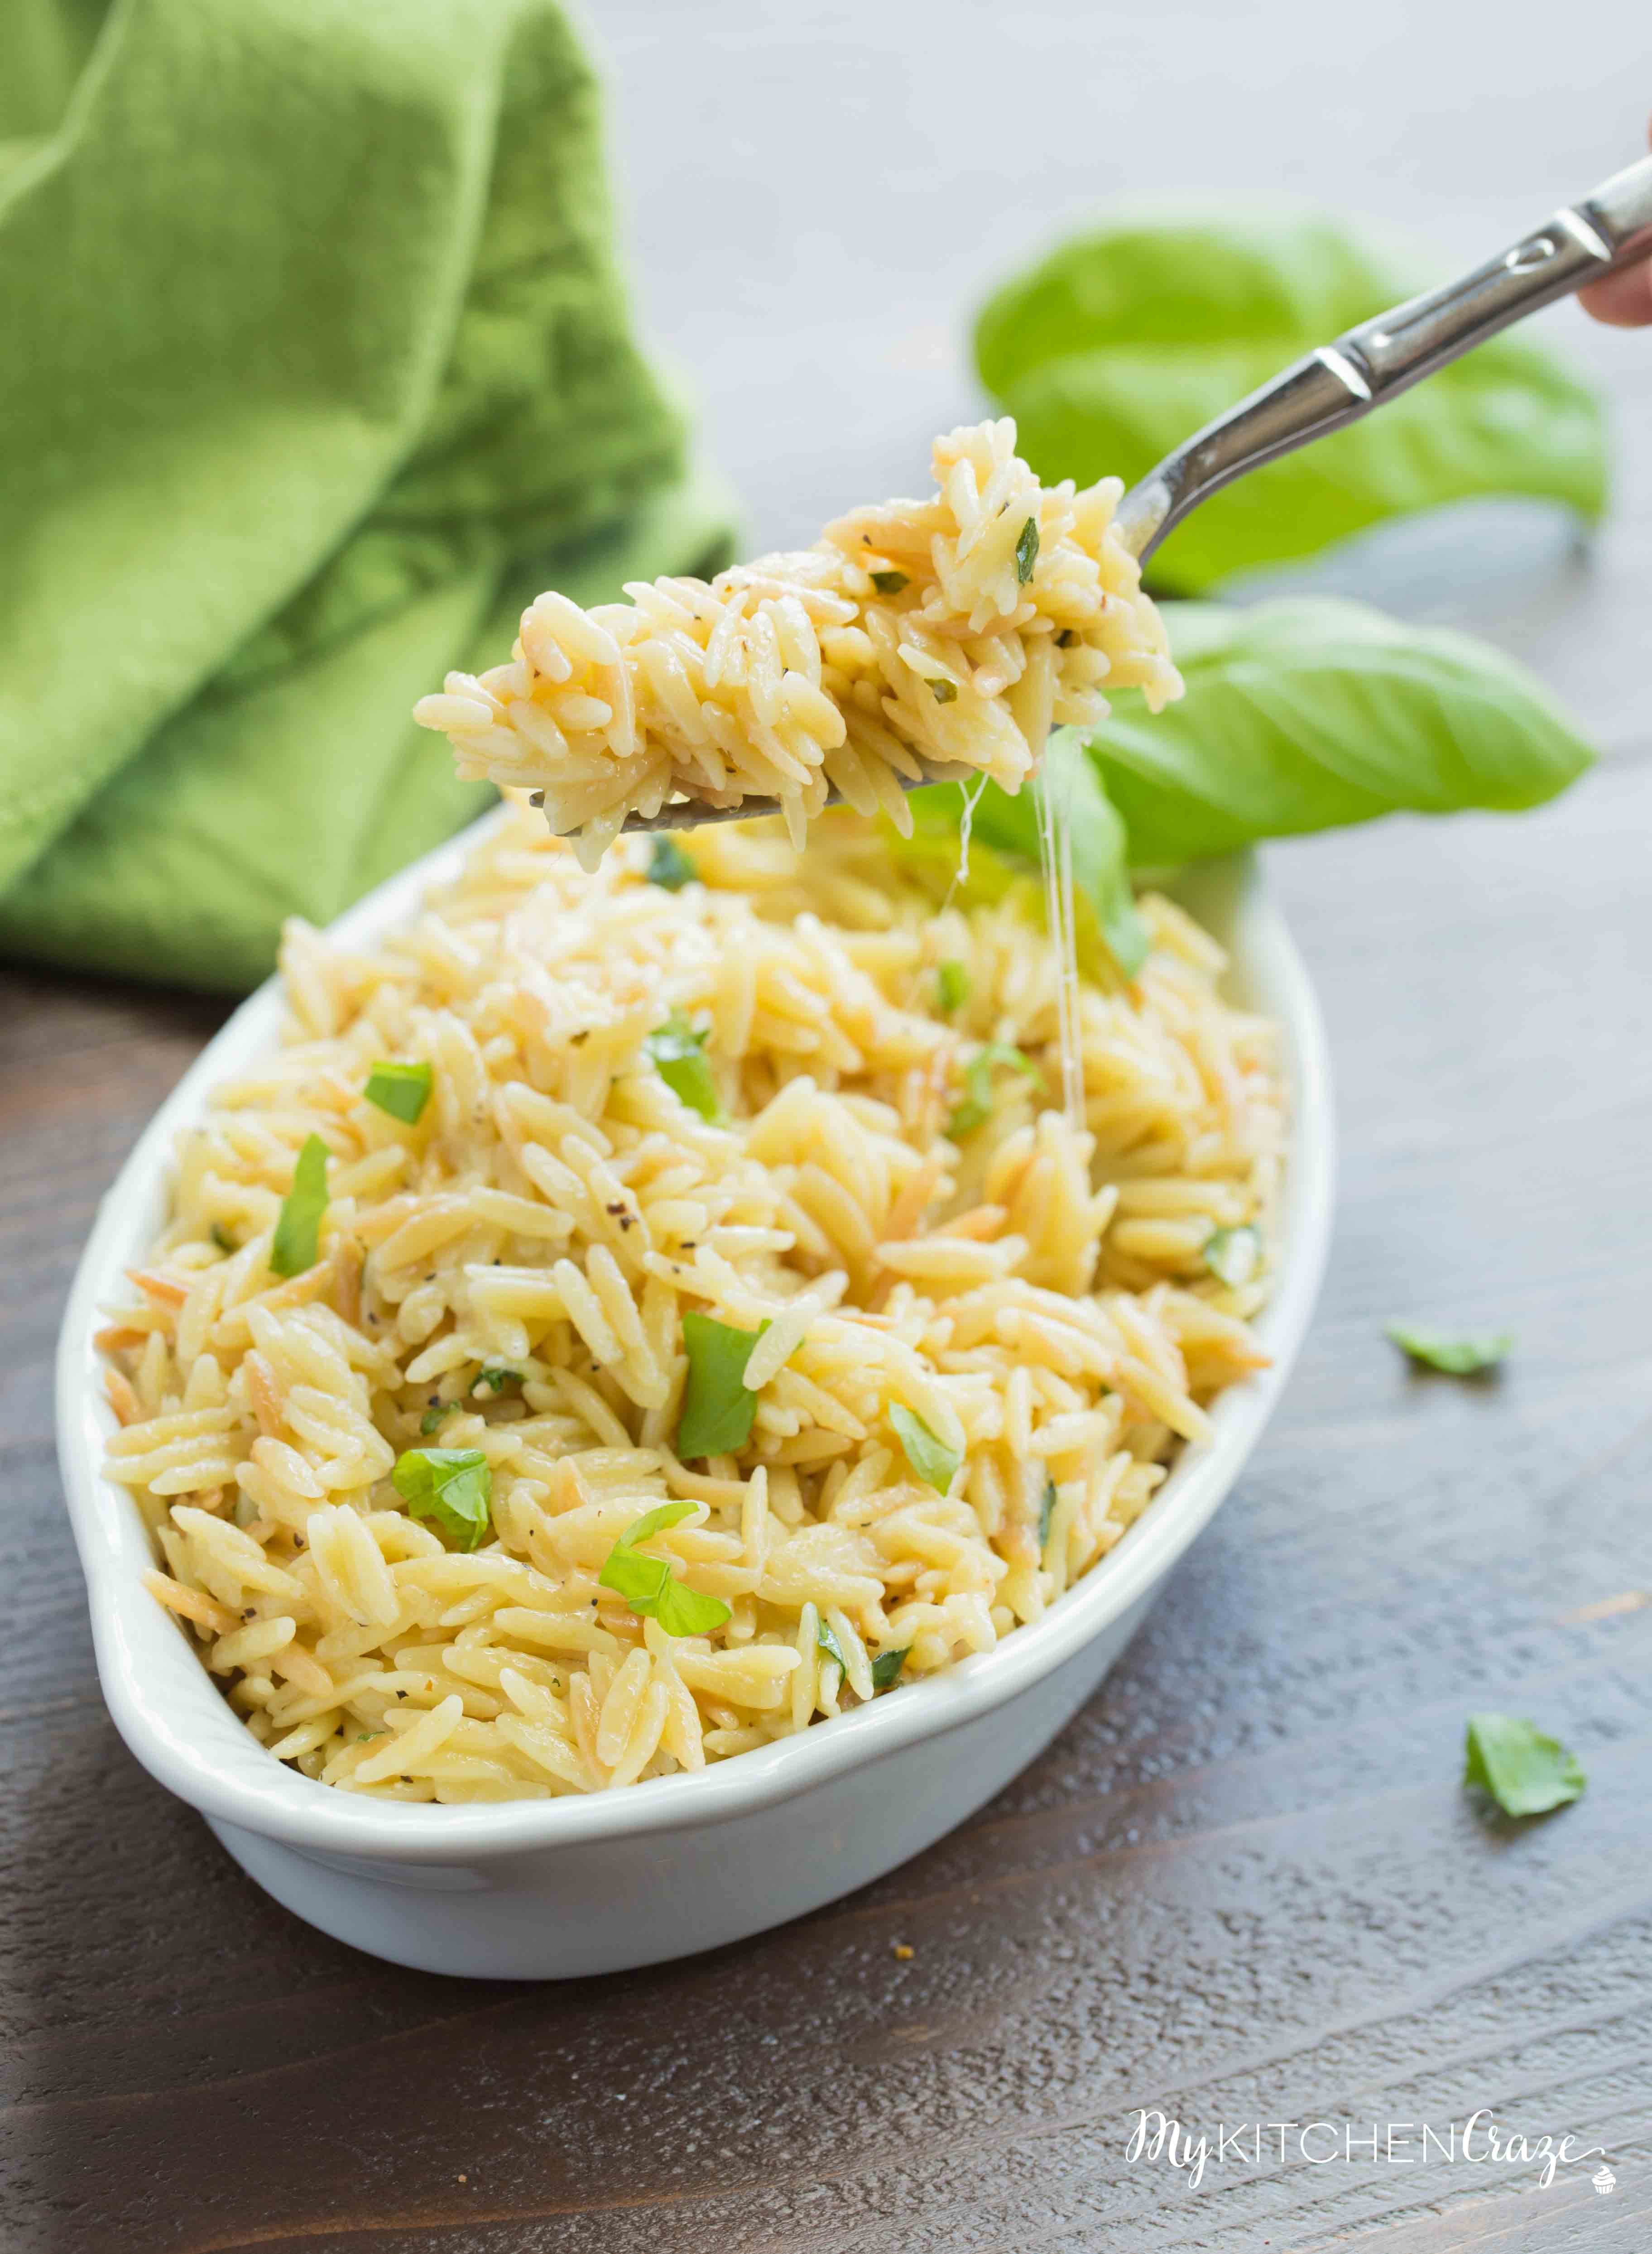 Cheesy Basil Orzo ~ Only 6 ingredients are all you need to make this fresh pasta side recipe. The cheese and basil brighten the dish making it perfect for any main.